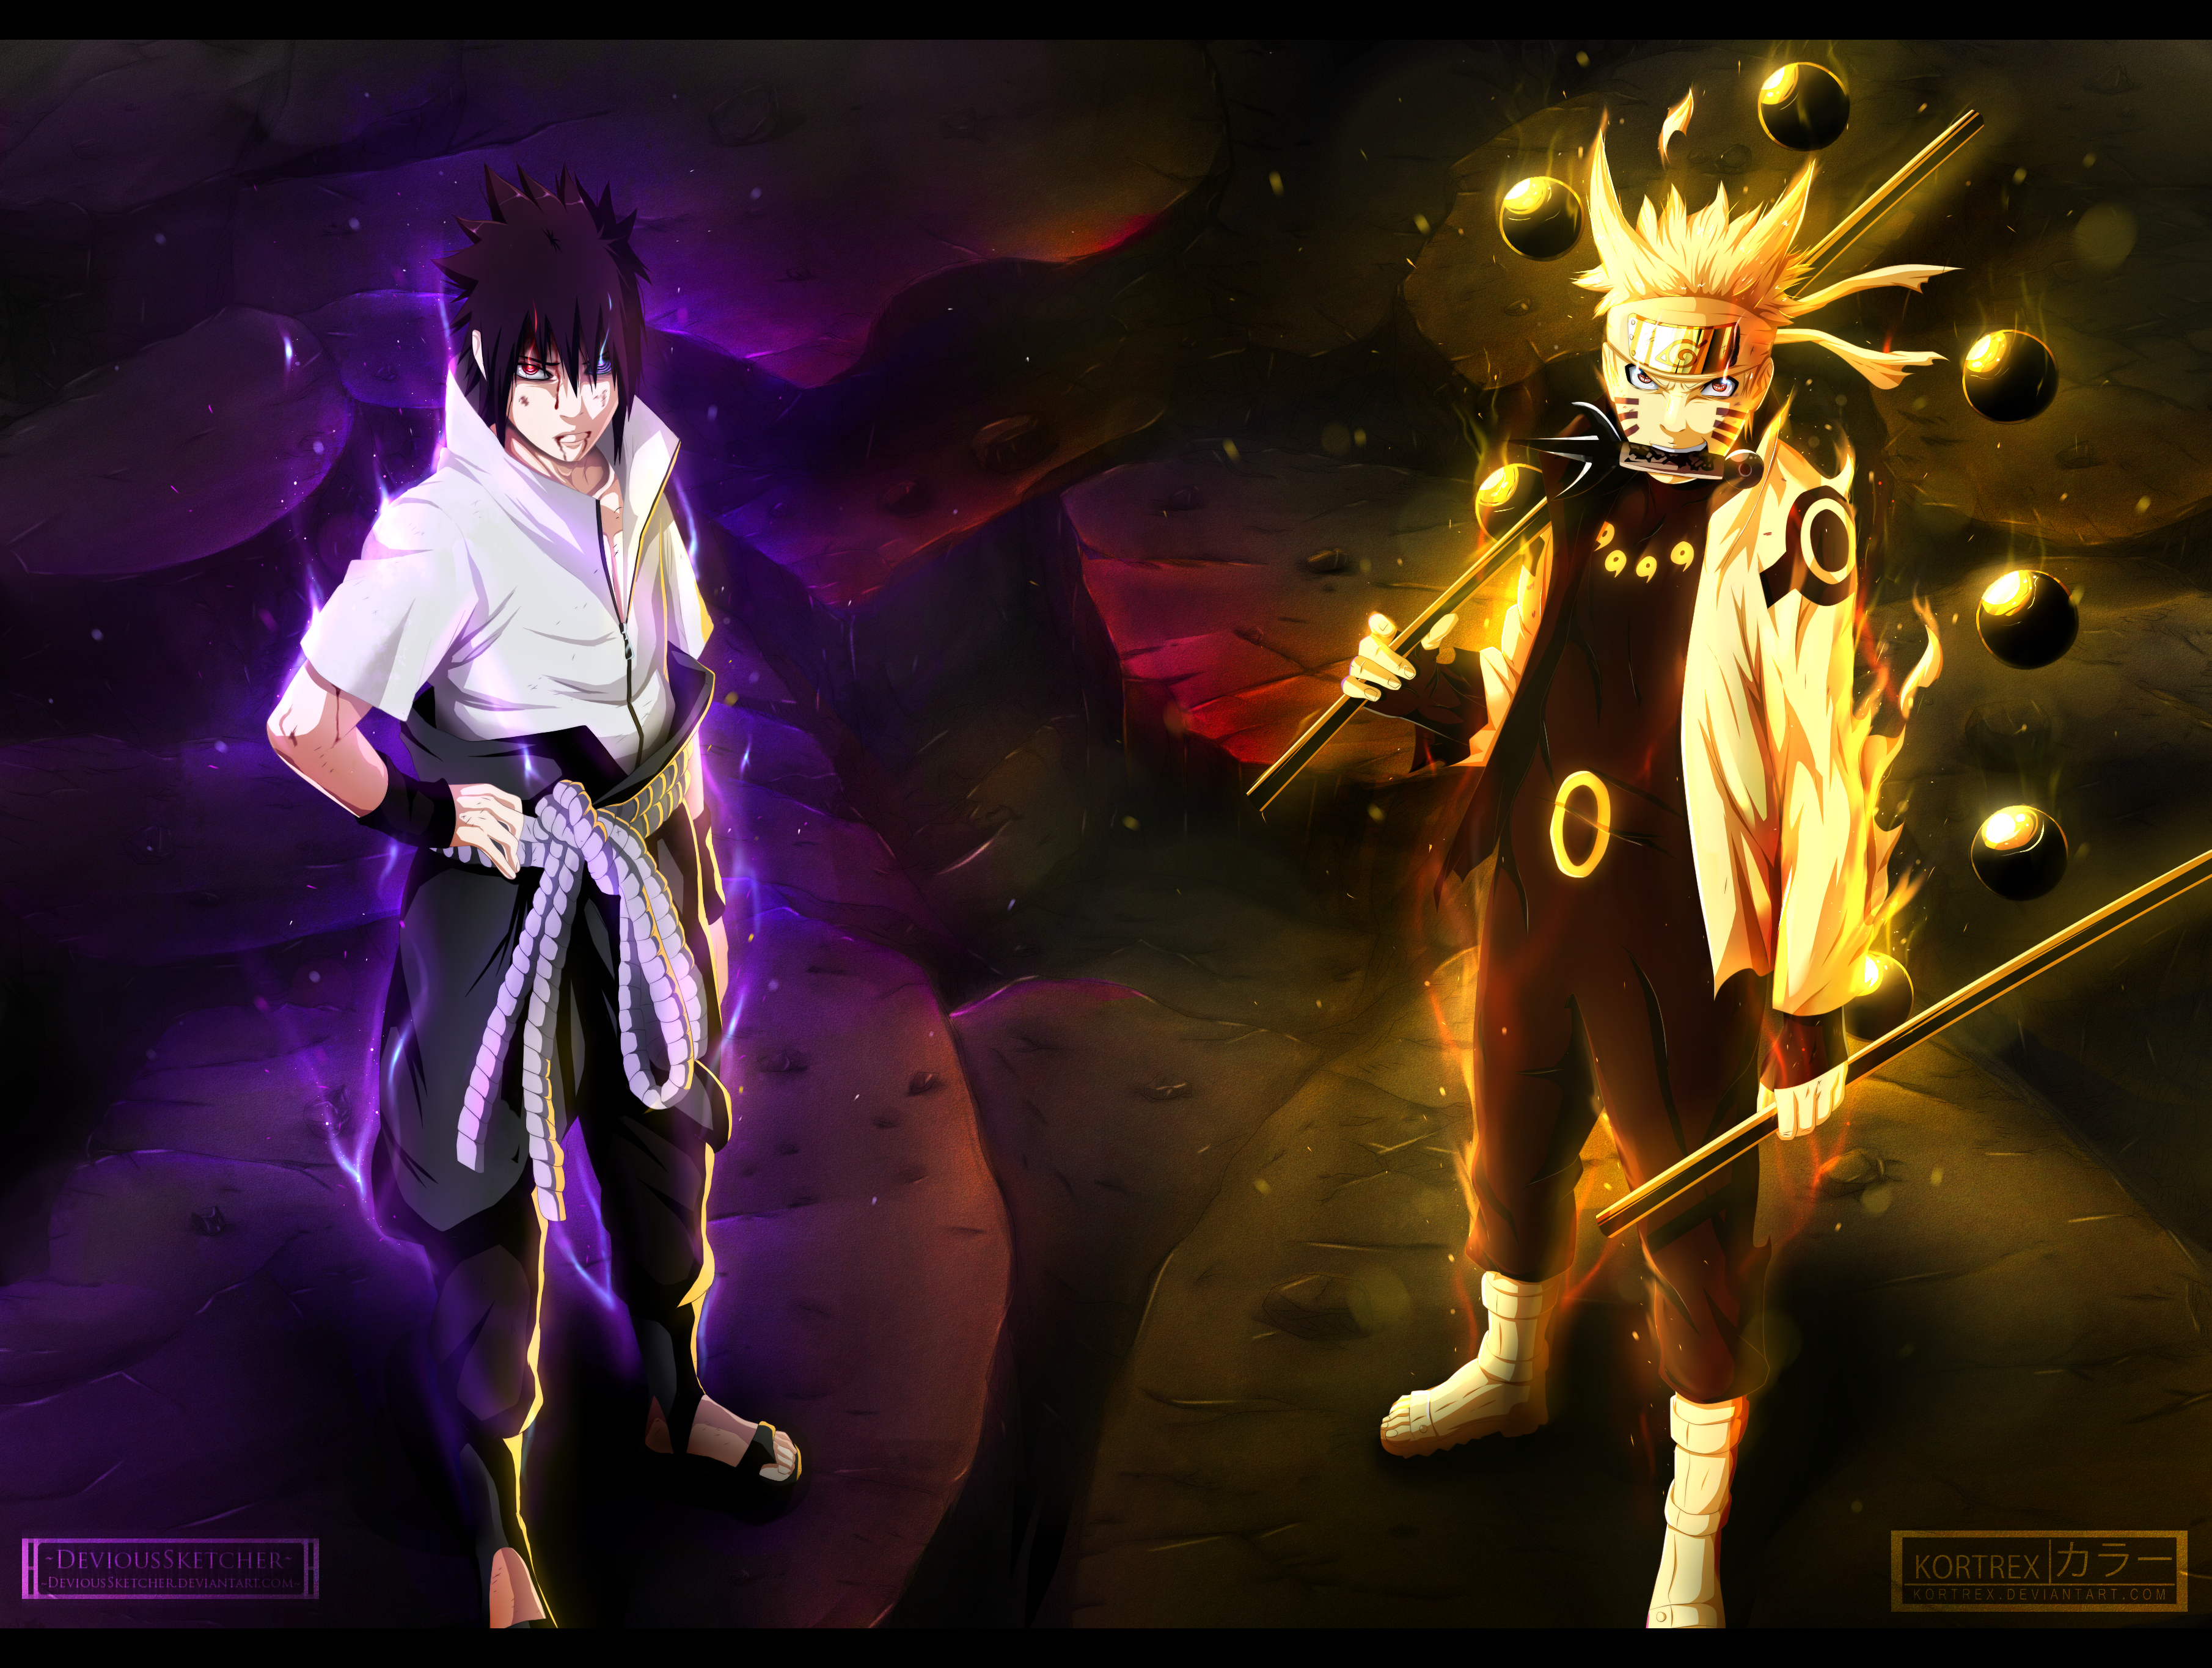 Naruto Image Galleries | ZGR-4456134 HD Quality Pictures